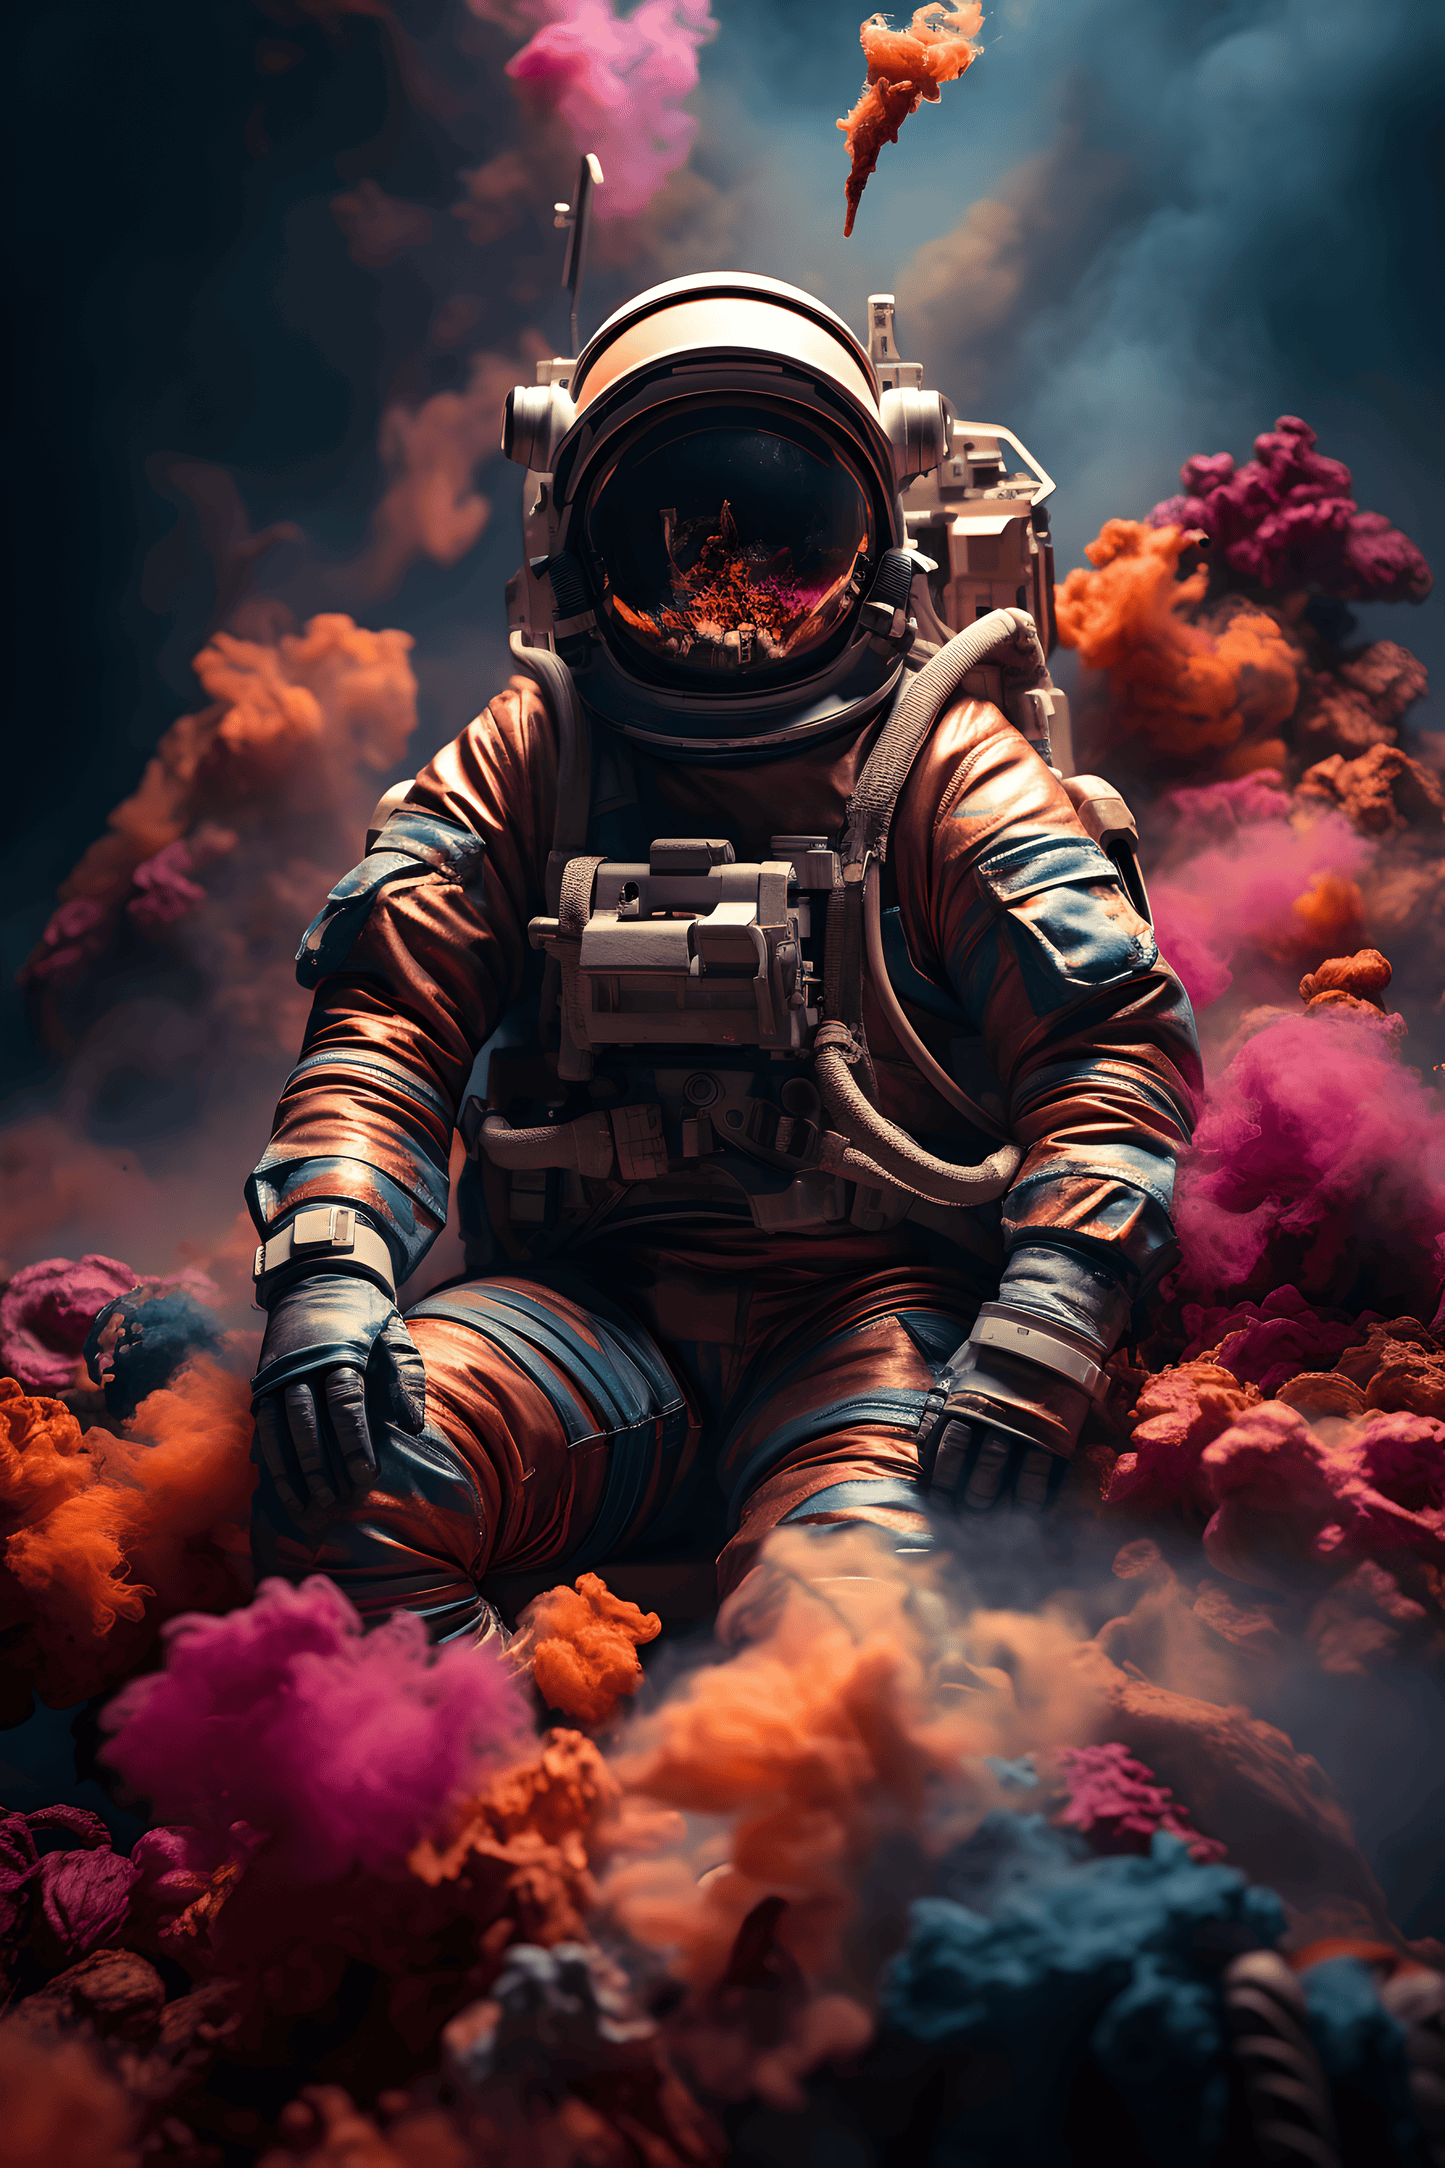 Space Dust